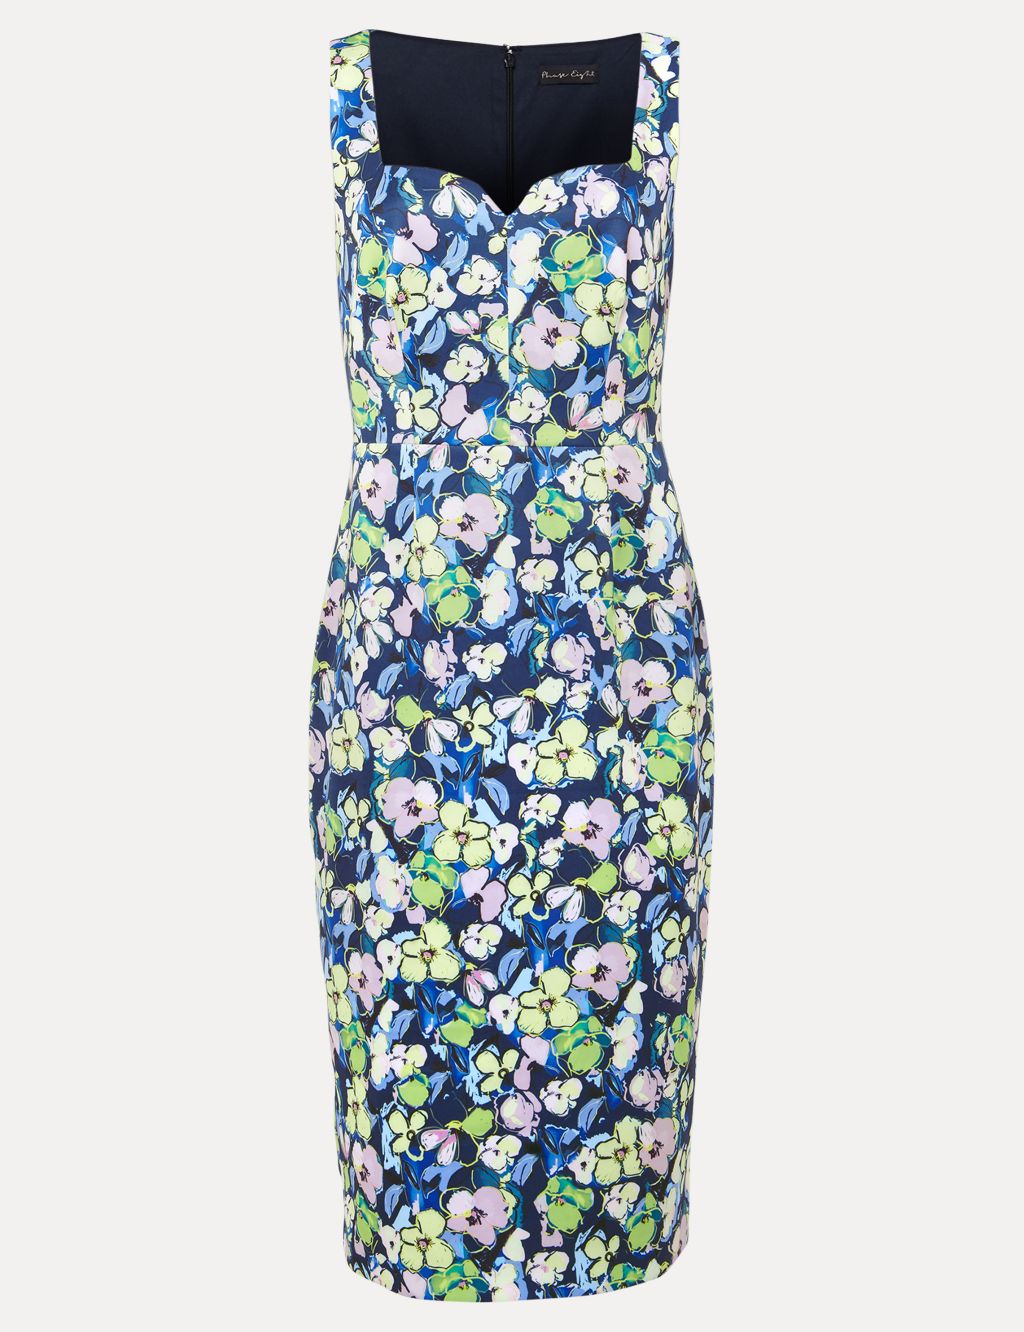 Floral Square Neck Knee Length Bodycon Dress image 2